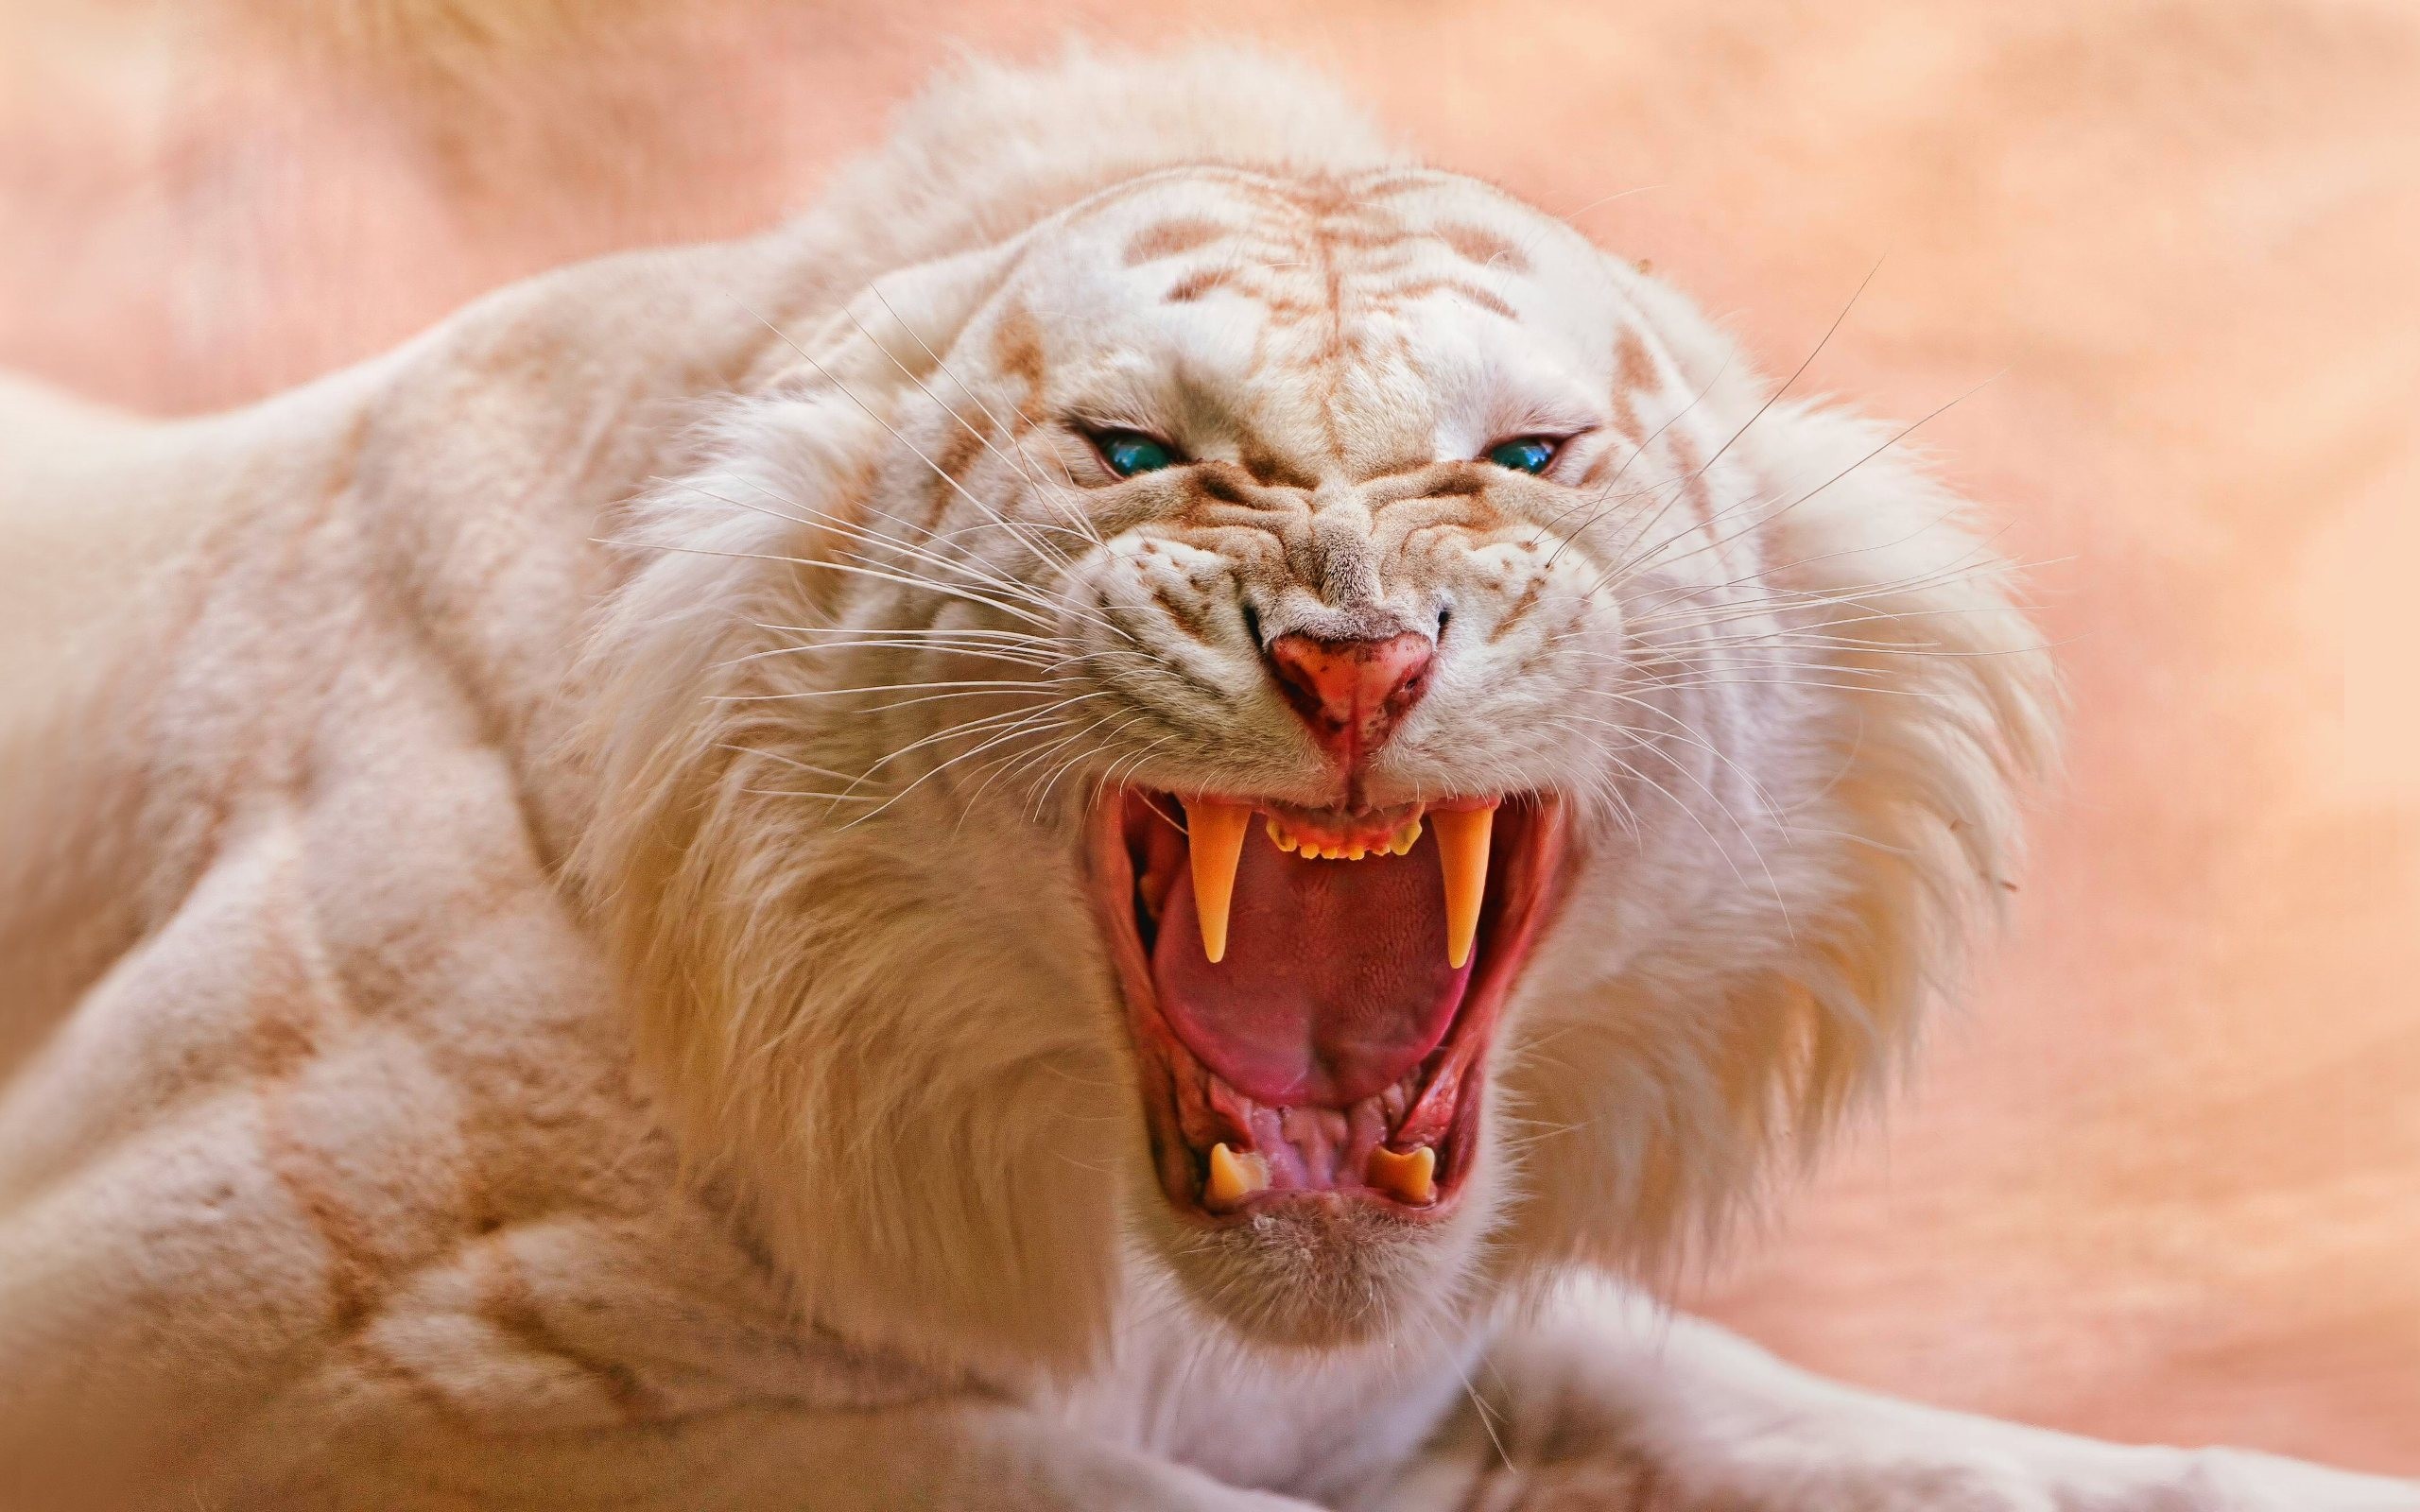 angry white tiger eyes